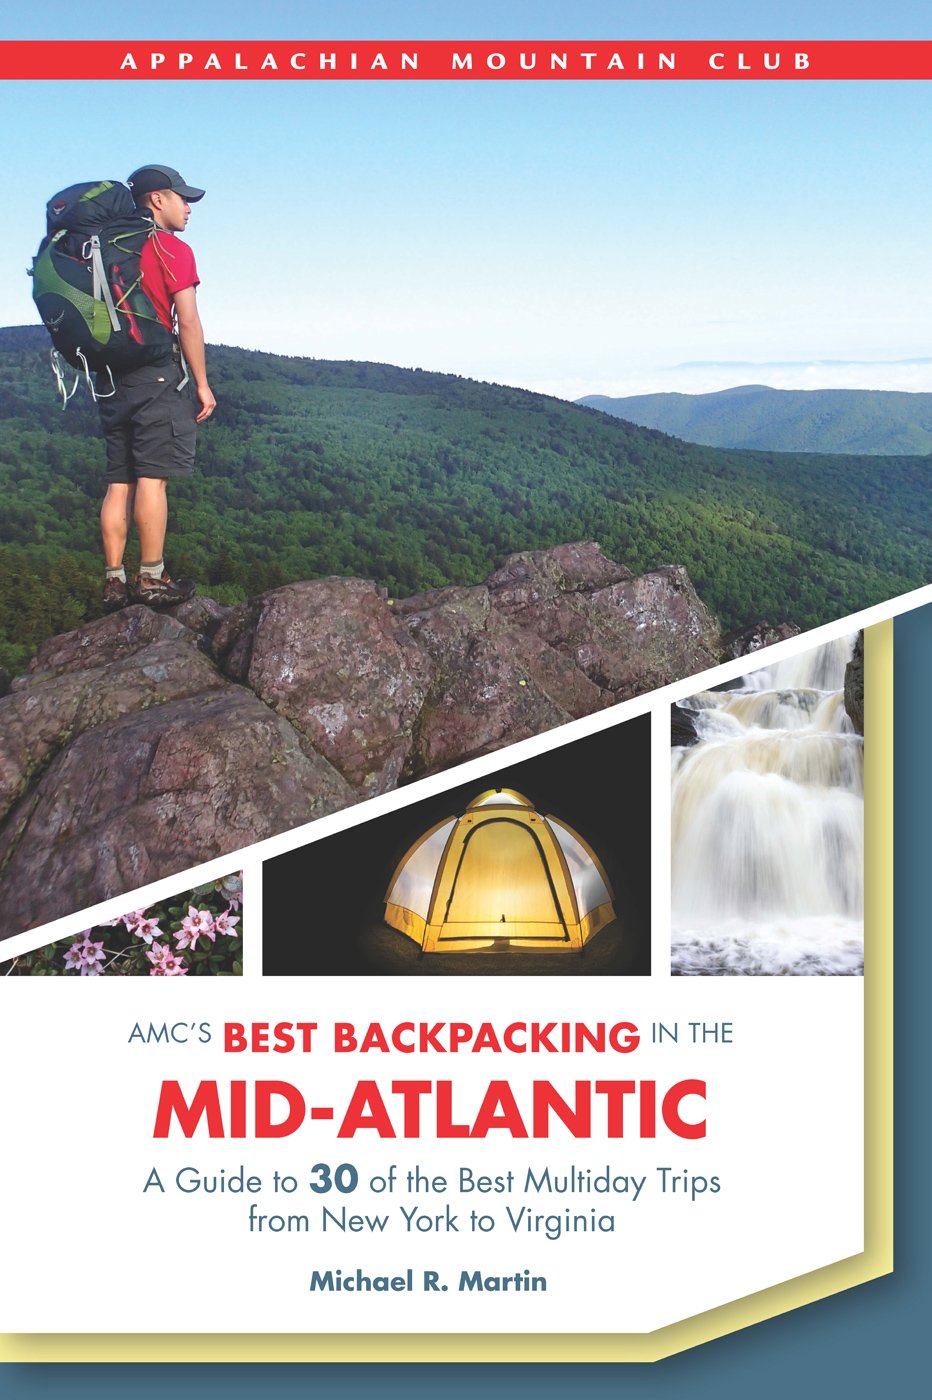 AMC's Best Backpacking in the Mid-Atlantic